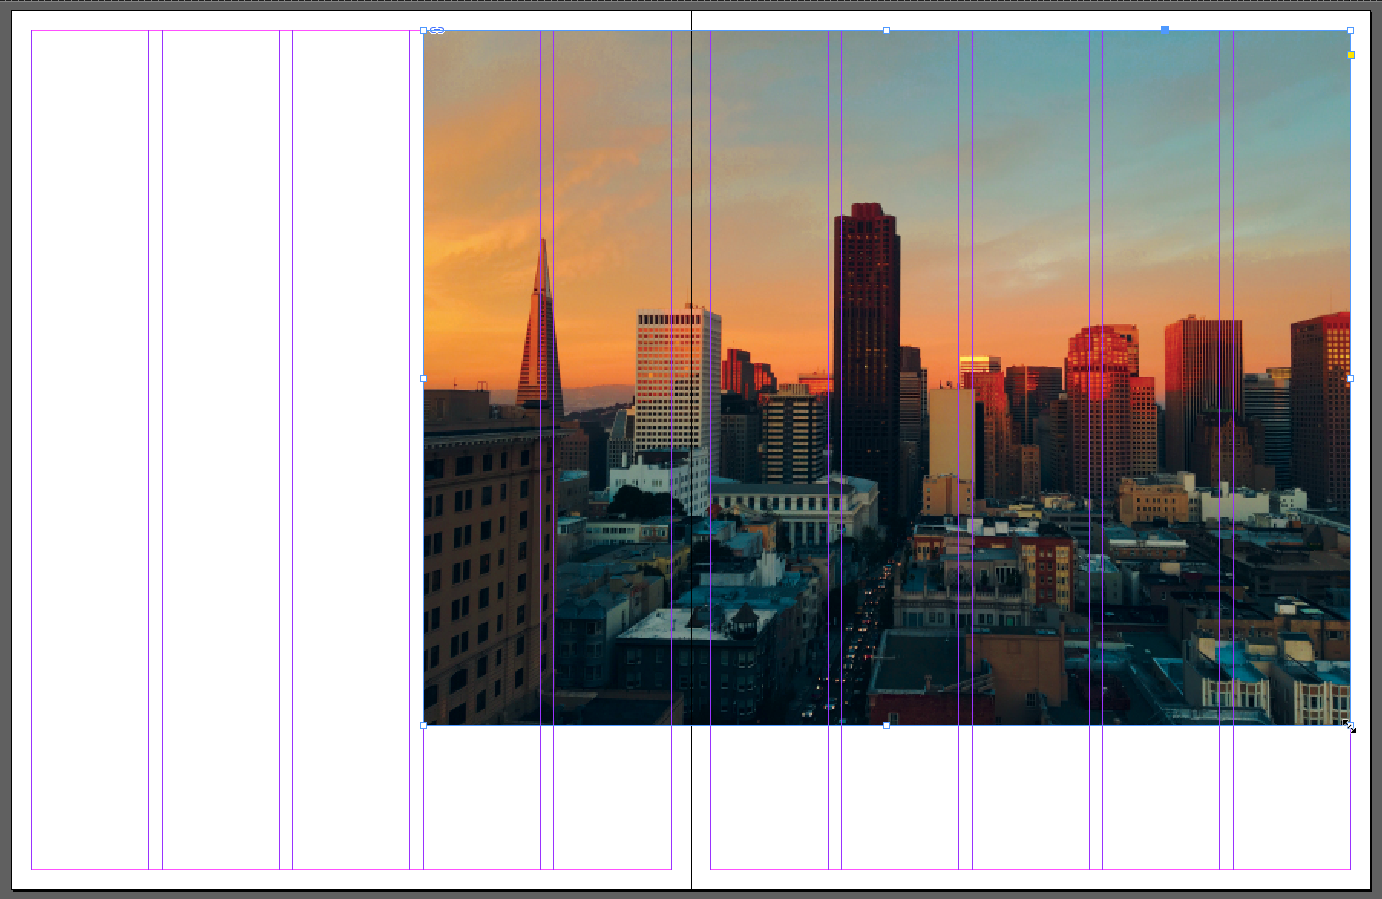 Screen capture showing a photo of a city skyline placed into a two-page spread layout in InDesign. The photo is 7 columns wide and positioned on the right side of the spread, leaving 3 columns of space on the left side of the spread.